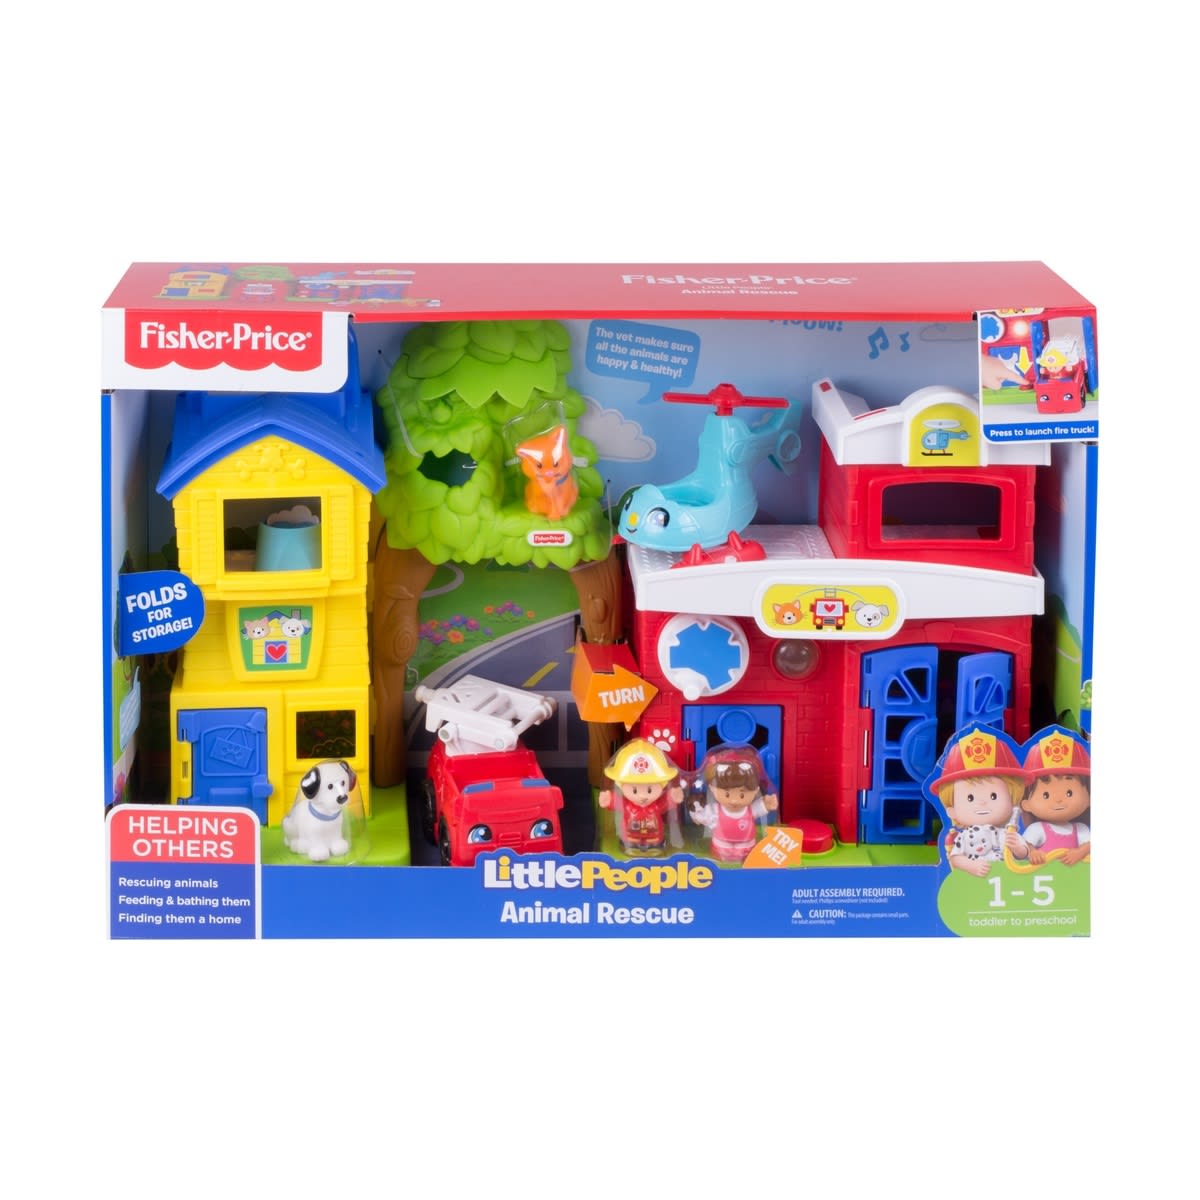 Fisher Price Little People Animal Rescue Fire station fire truck dog cat kitten 